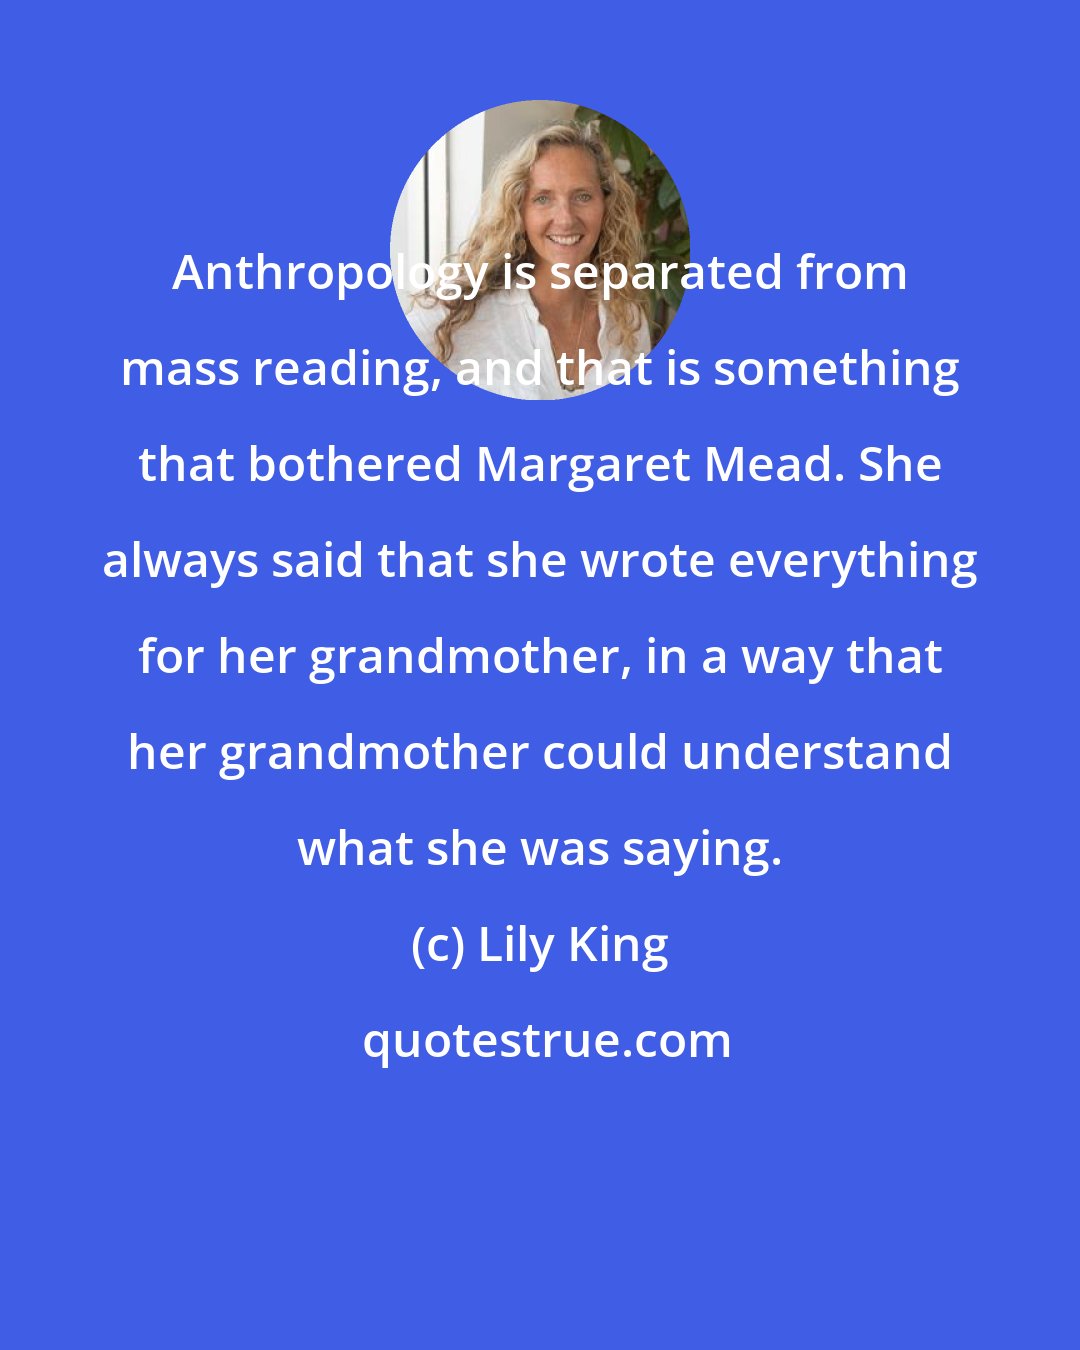 Lily King: Anthropology is separated from mass reading, and that is something that bothered Margaret Mead. She always said that she wrote everything for her grandmother, in a way that her grandmother could understand what she was saying.